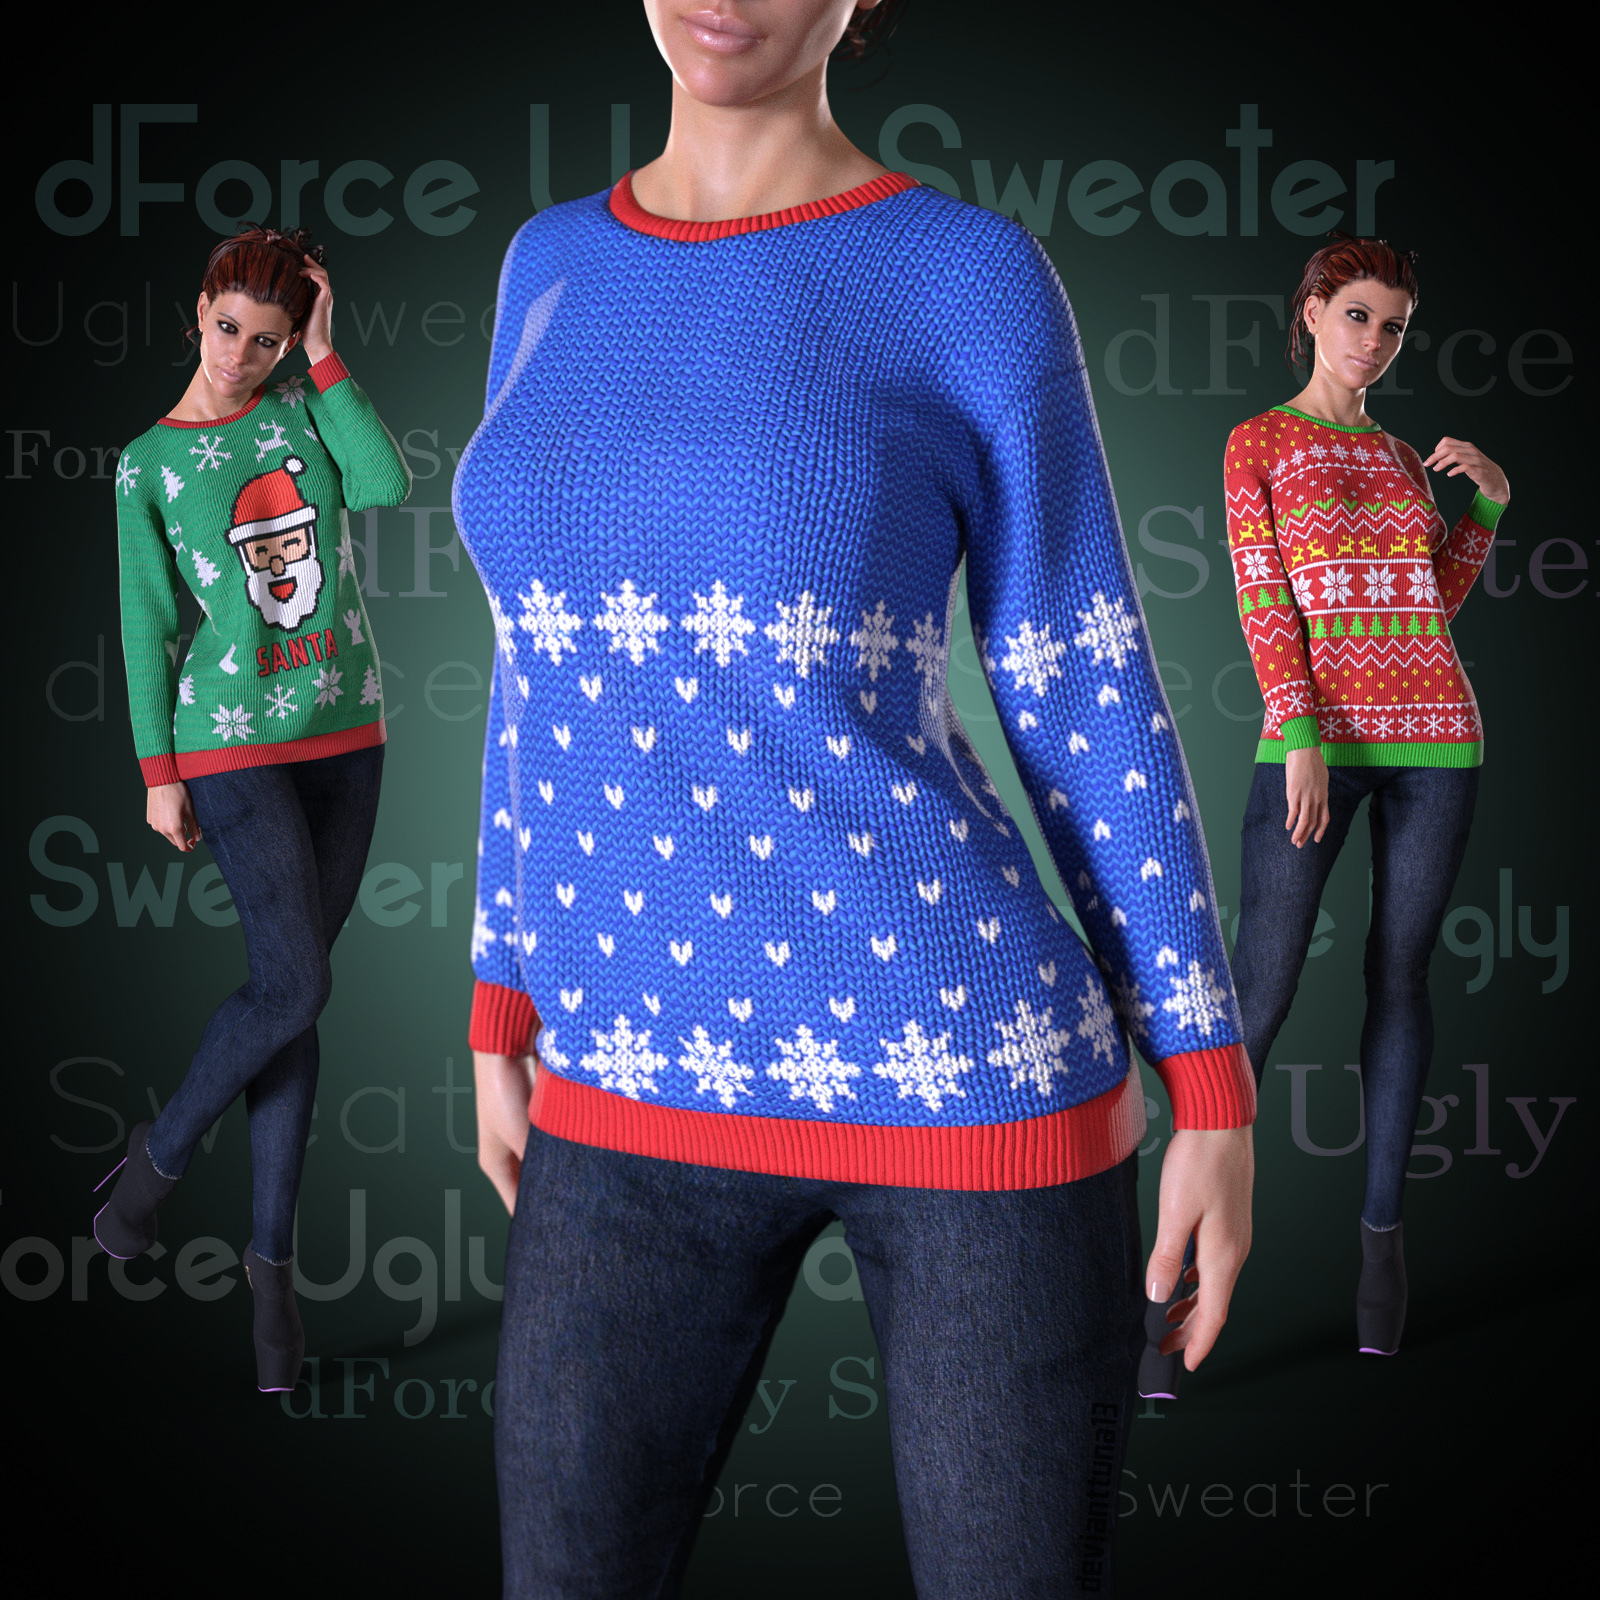 dForce Ugly Sweater for G8F by: devianttuna13, 3D Models by Daz 3D